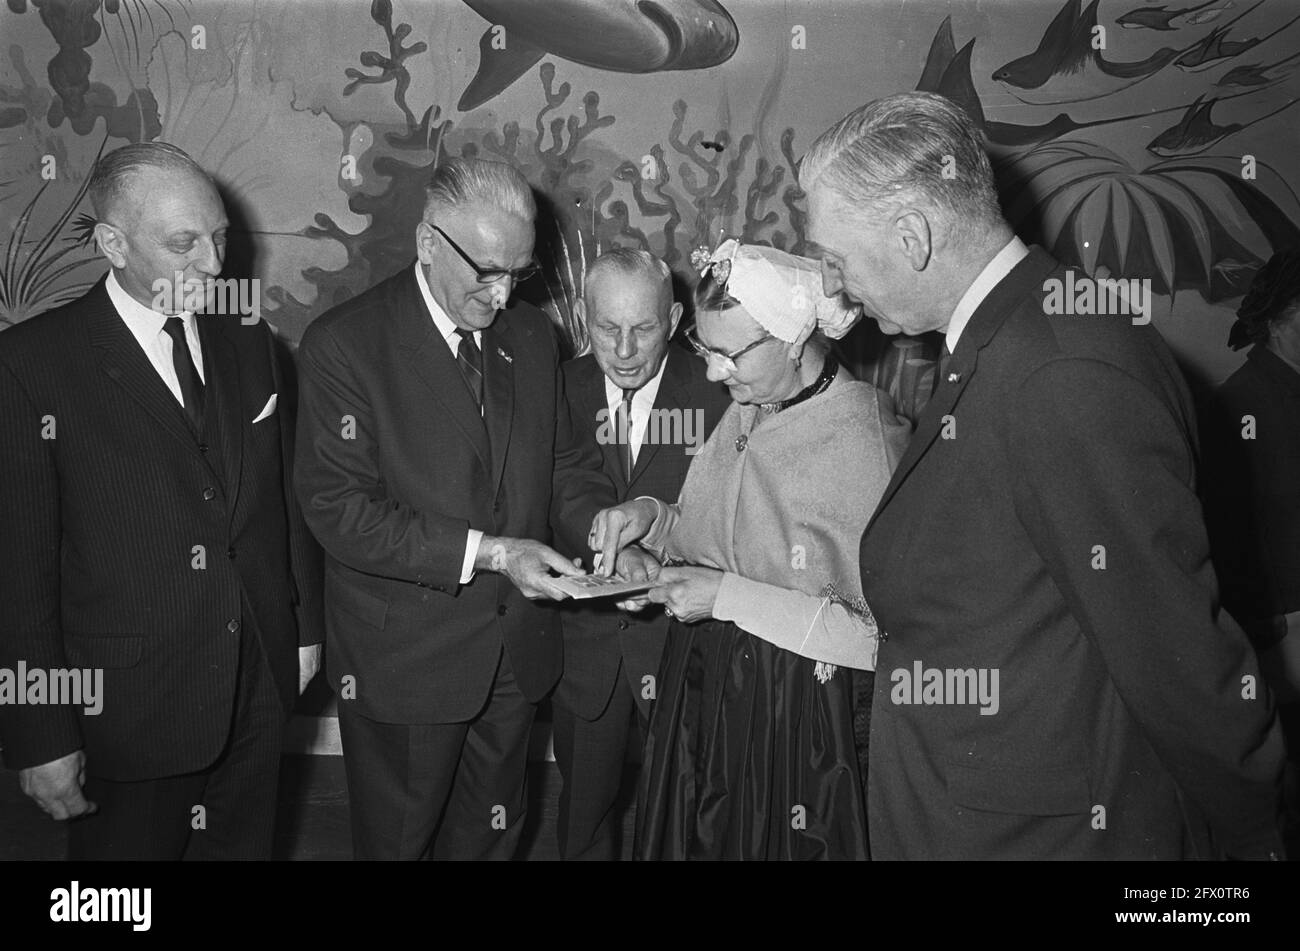 Summer postage stamps 1967, Director-General of the PTT prof. ir. G. H. Bast gives first stamps to Mrs. P. Taal-Bal, April 11, 1967, philately, costumes, stamps, The Netherlands, 20th century press agency photo, news to remember, documentary, historic photography 1945-1990, visual stories, human history of the Twentieth Century, capturing moments in time Stock Photo